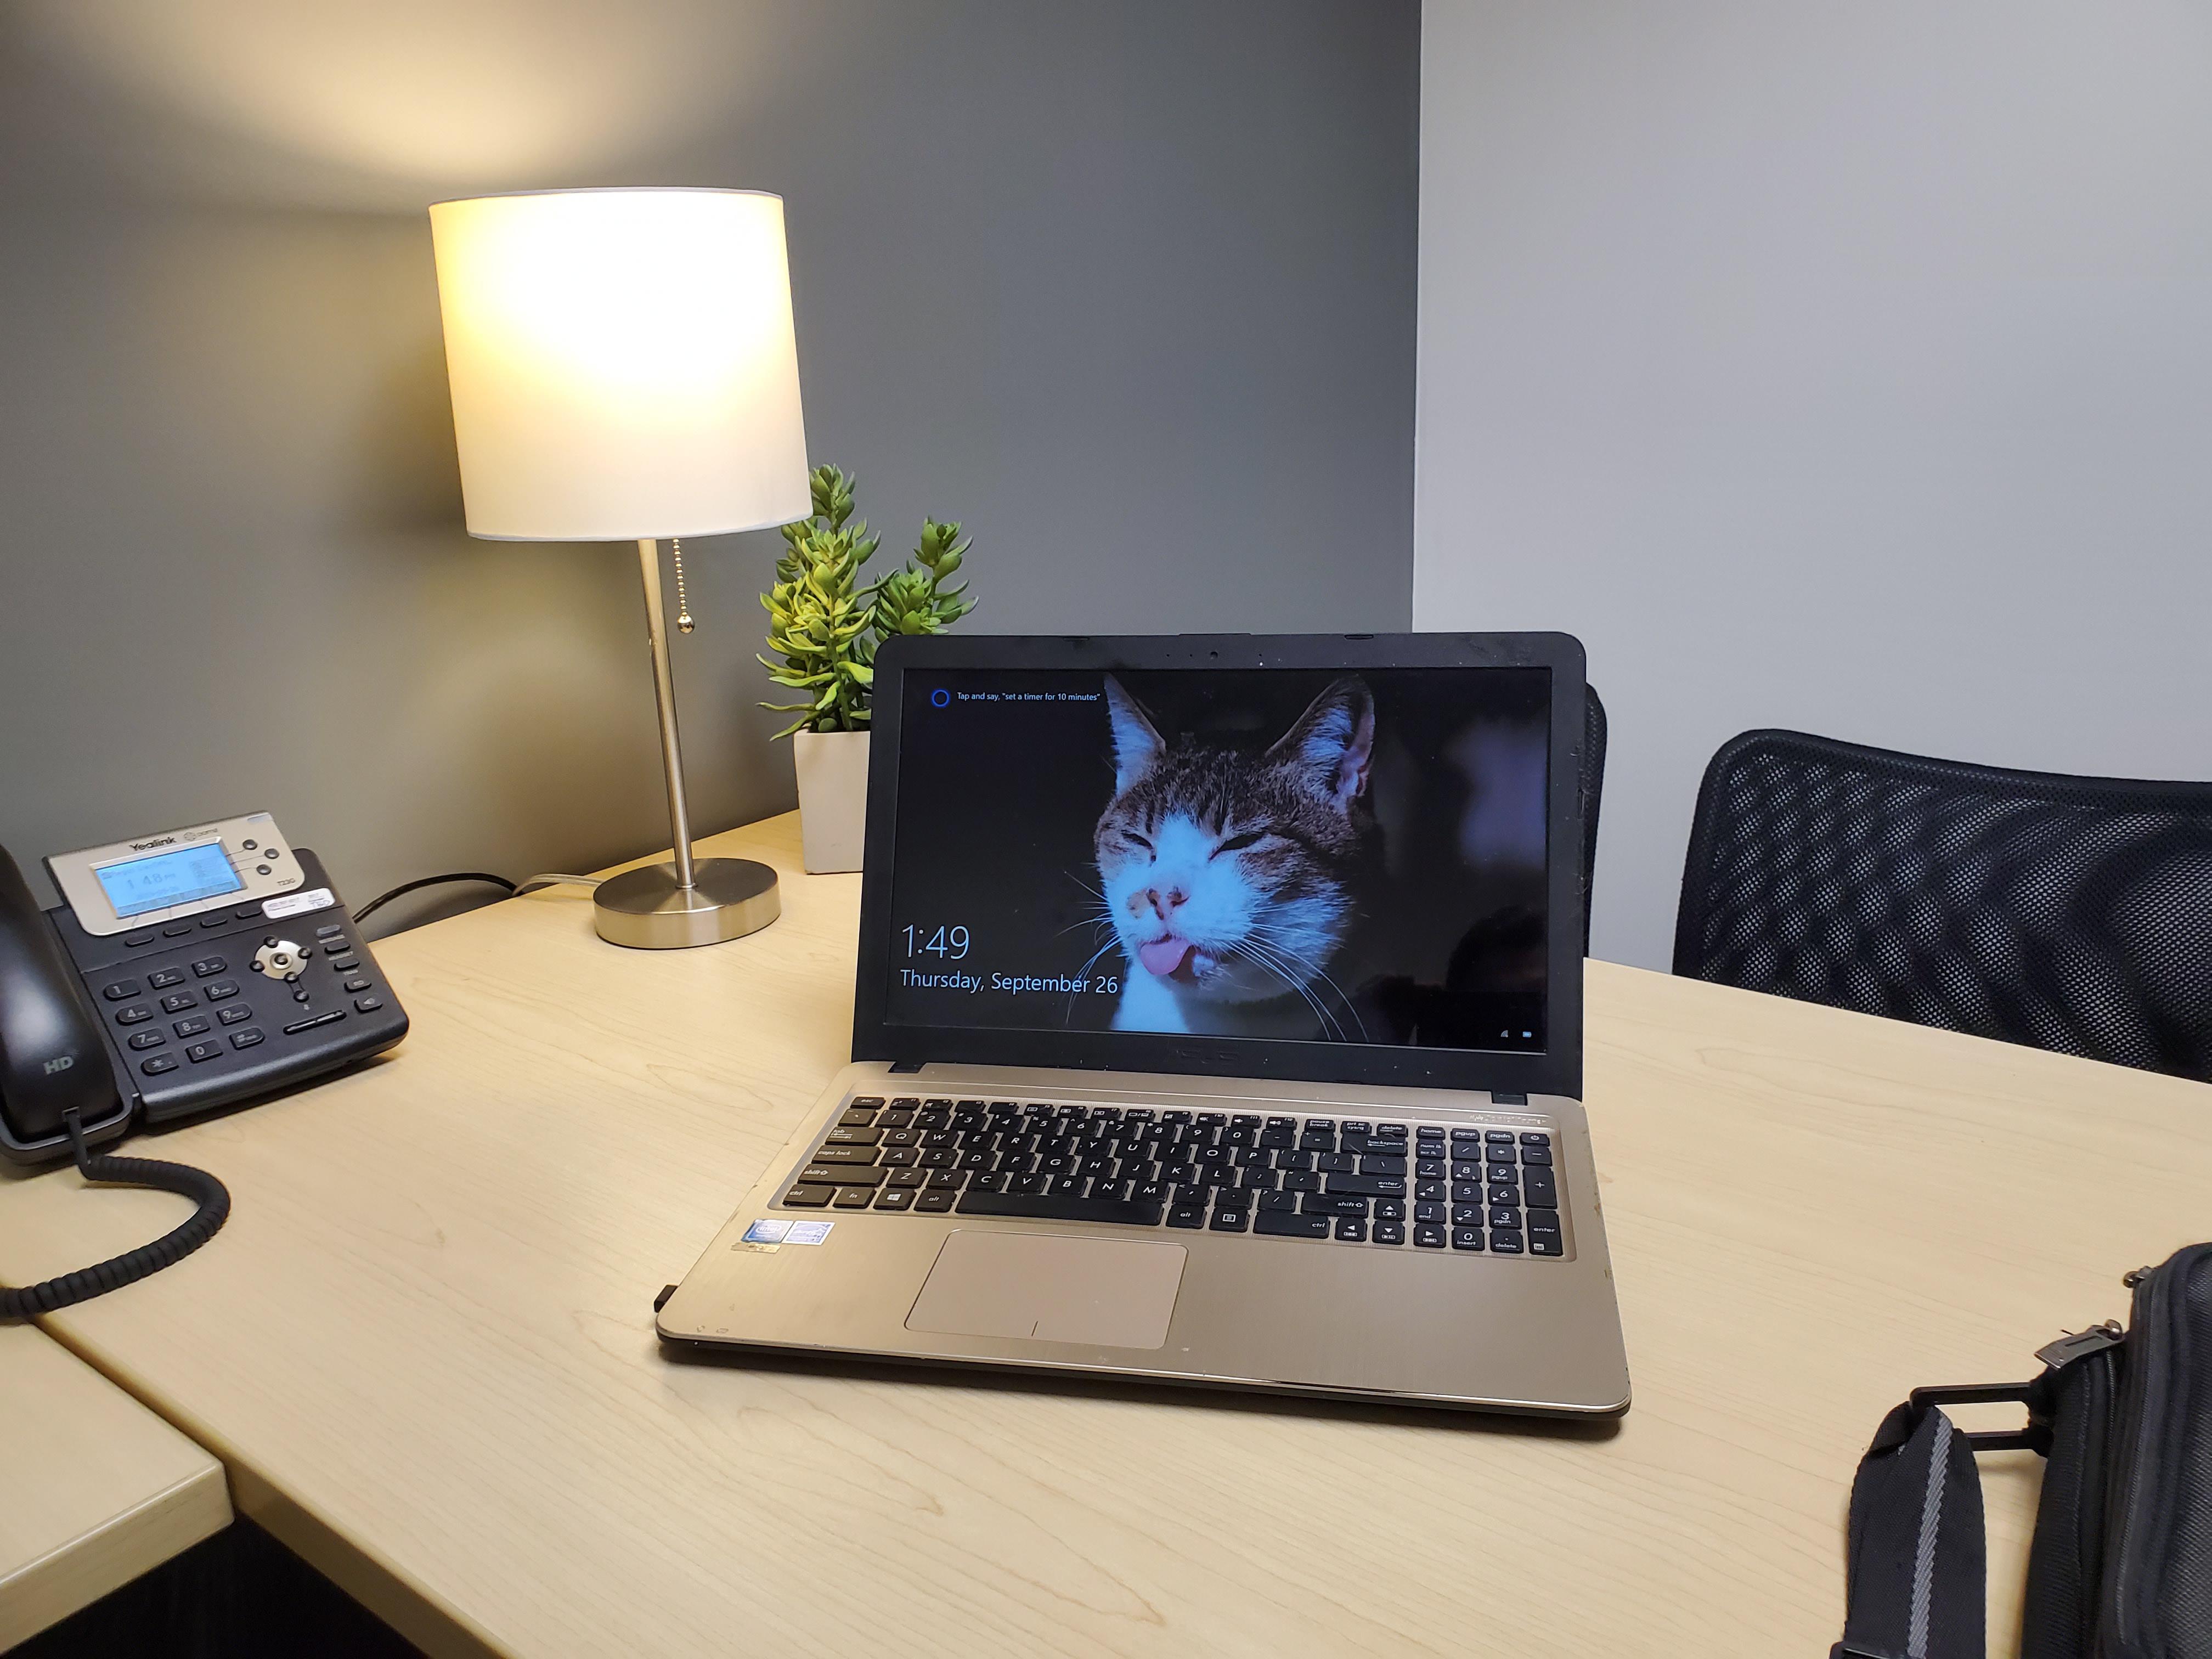 Preparing for a client meeting at the office for web design, web hosting, or SEO. We prepare for all of our meetings, and show up on time to help our customers. We can also build your website over the phone or through Zoom.